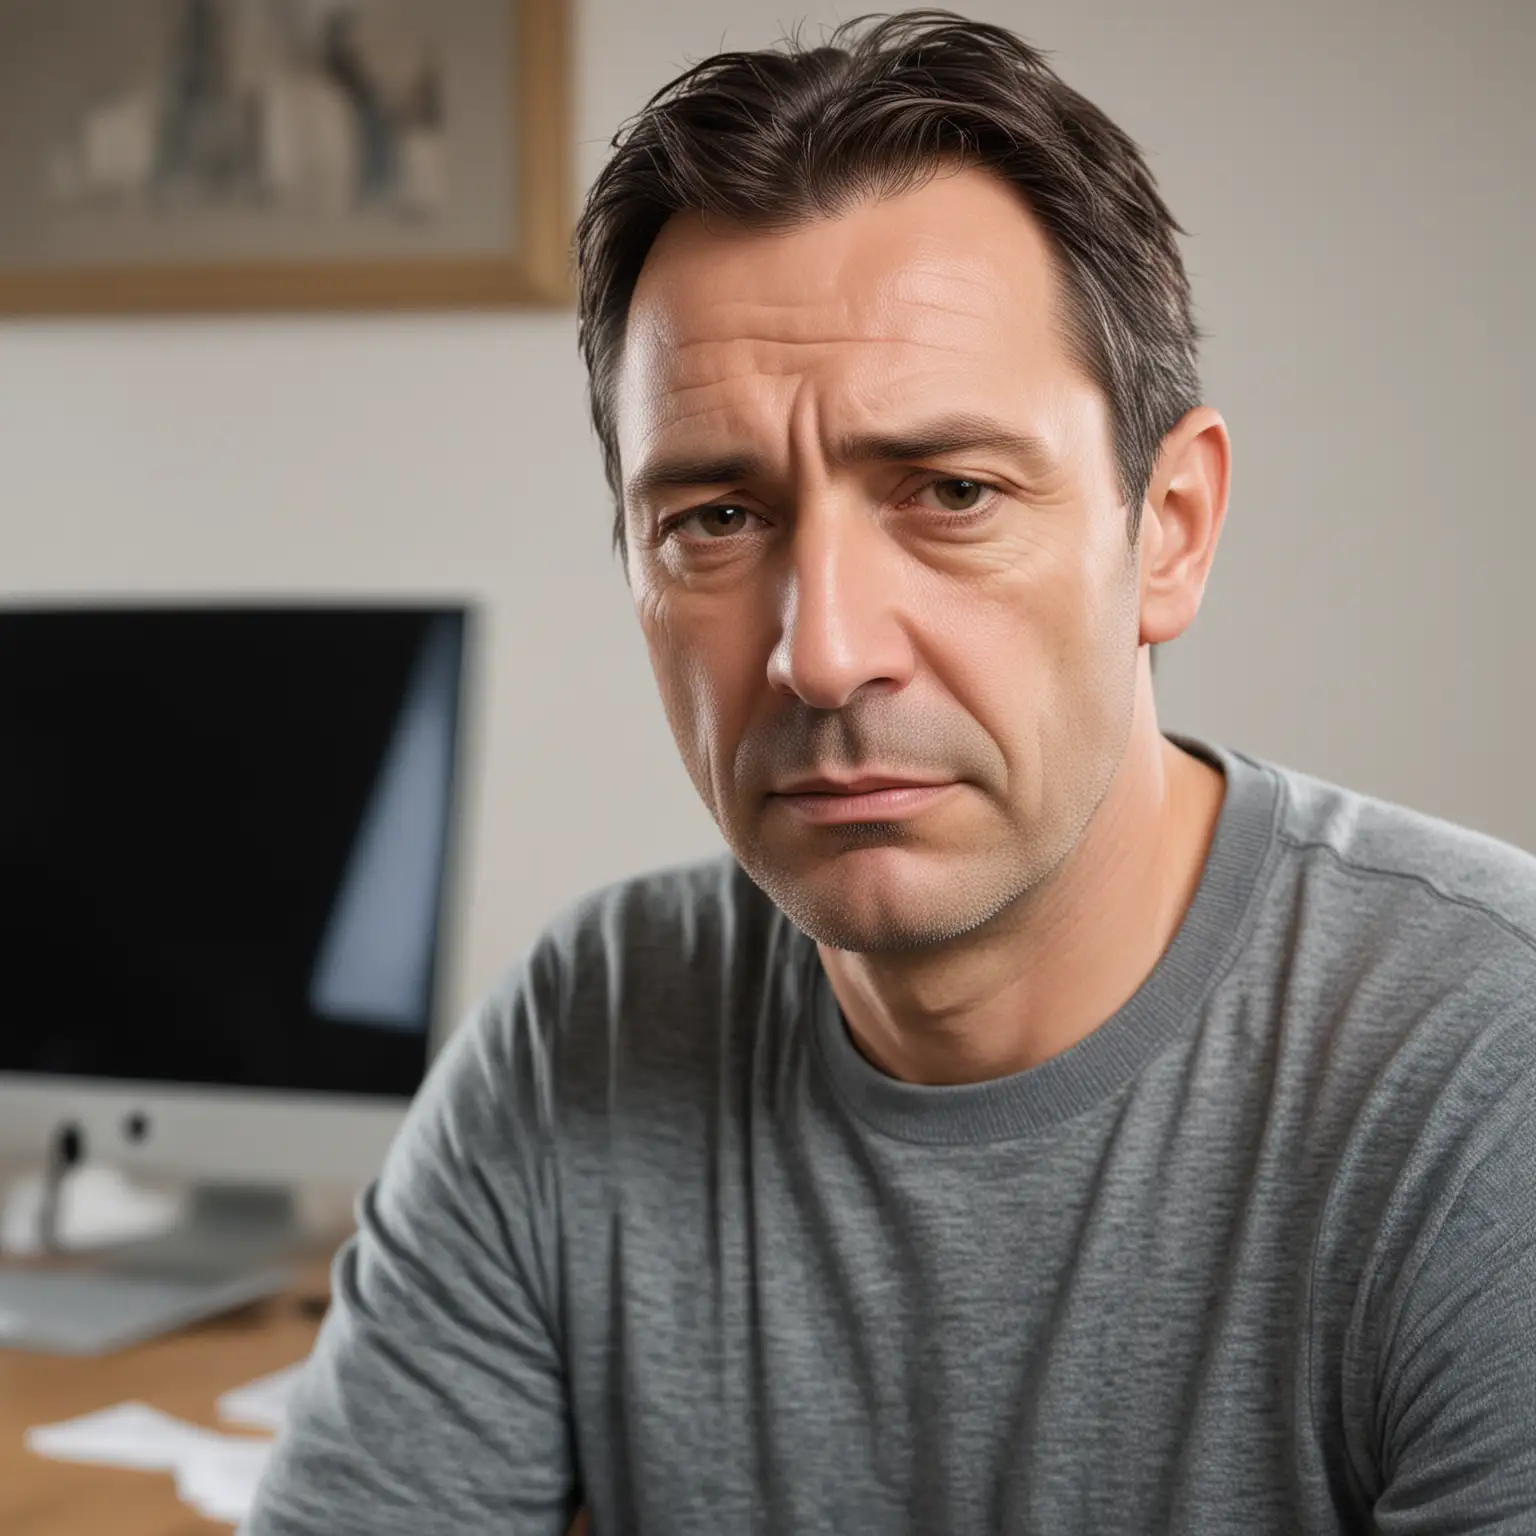 Middleaged Man Looking Reflective in Home Office Setting